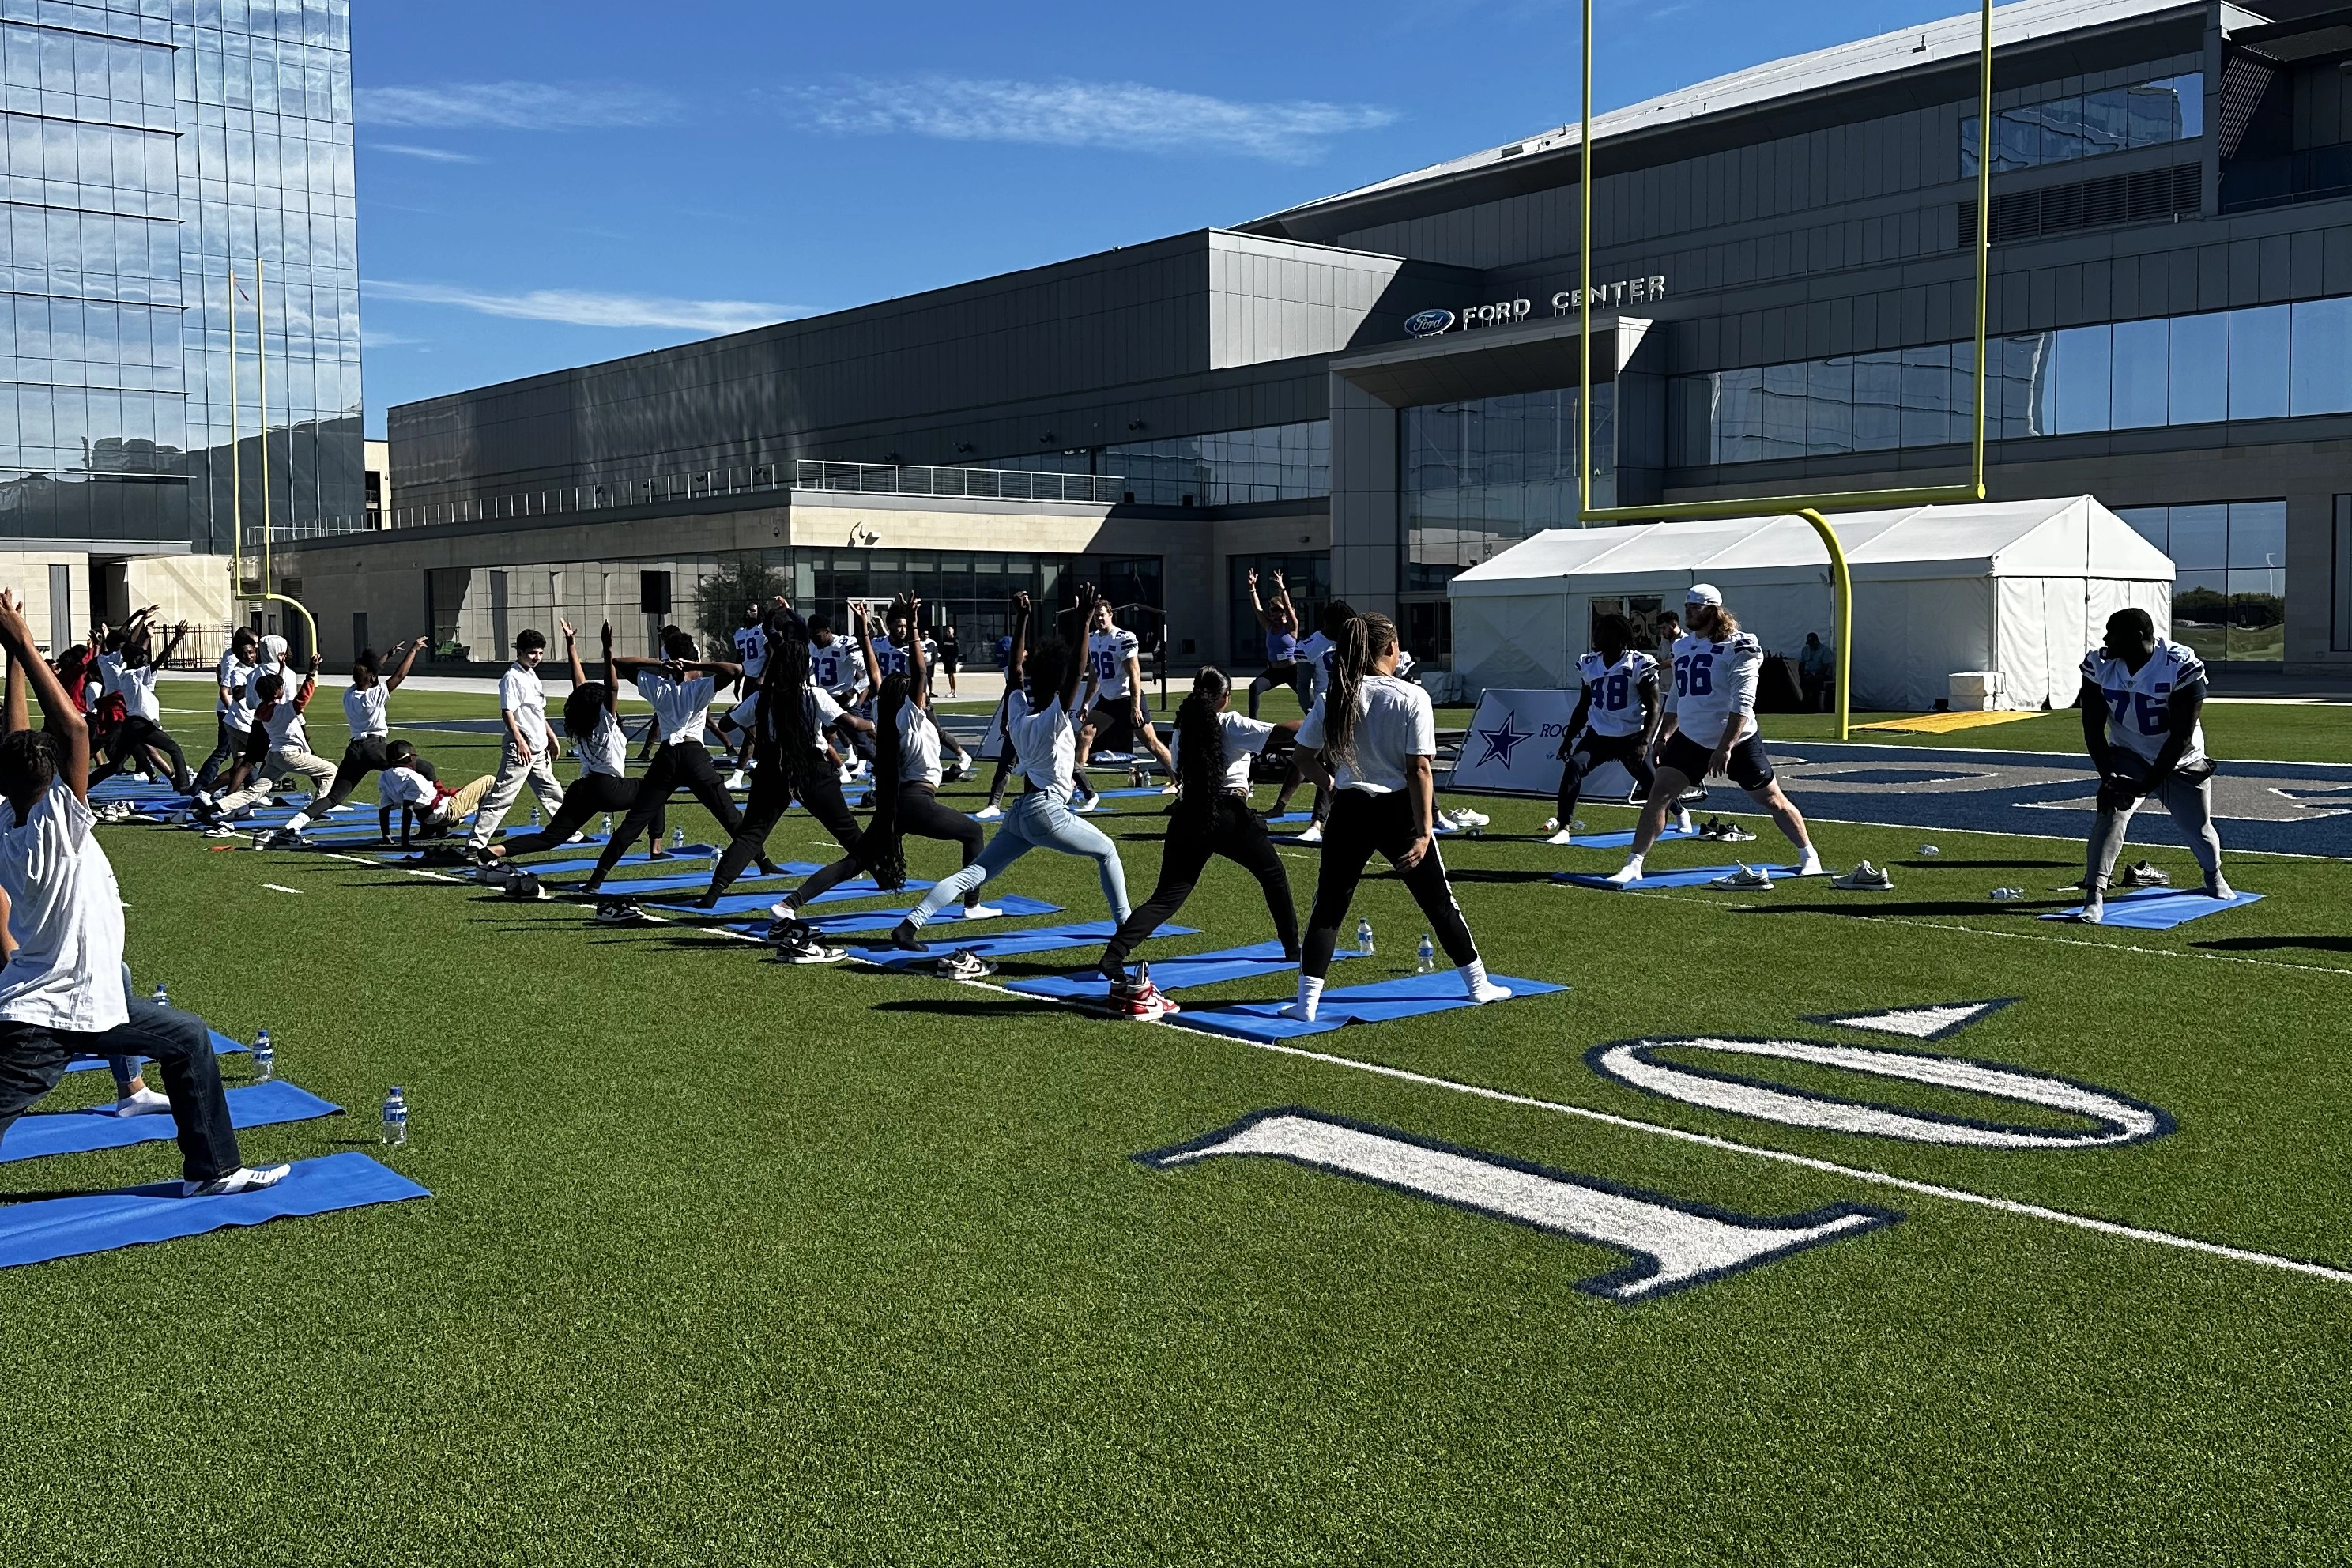 Students do yoga on the field with the Dallas Cowboys